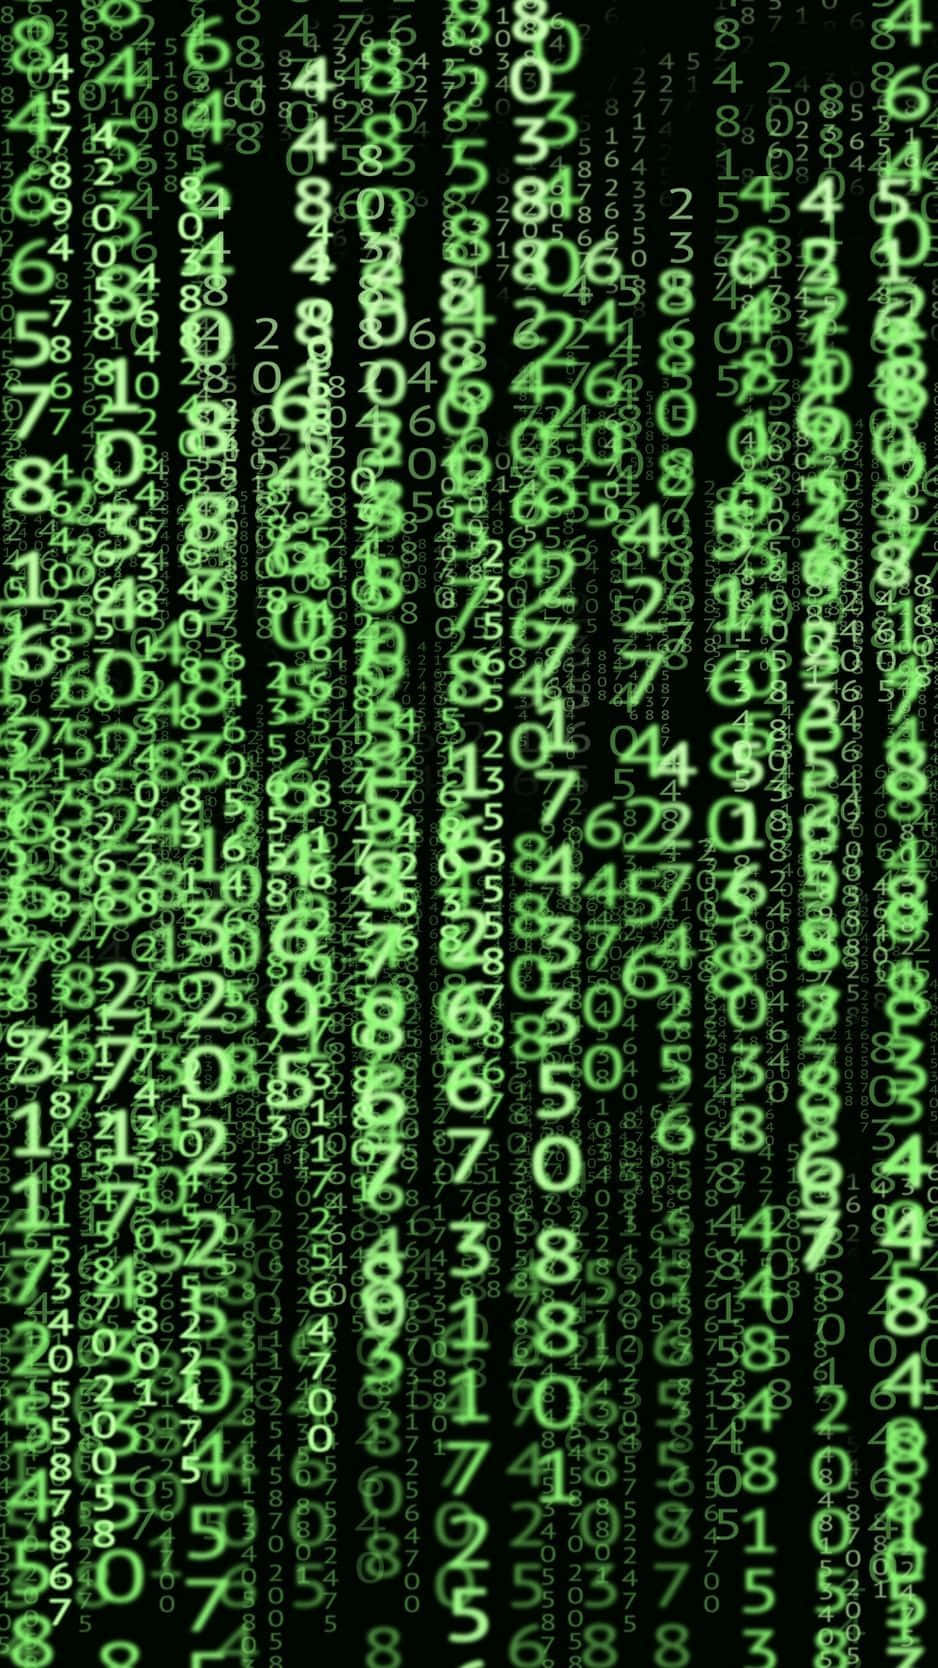 Get into the world of digital tech with the Matrix Iphone Wallpaper